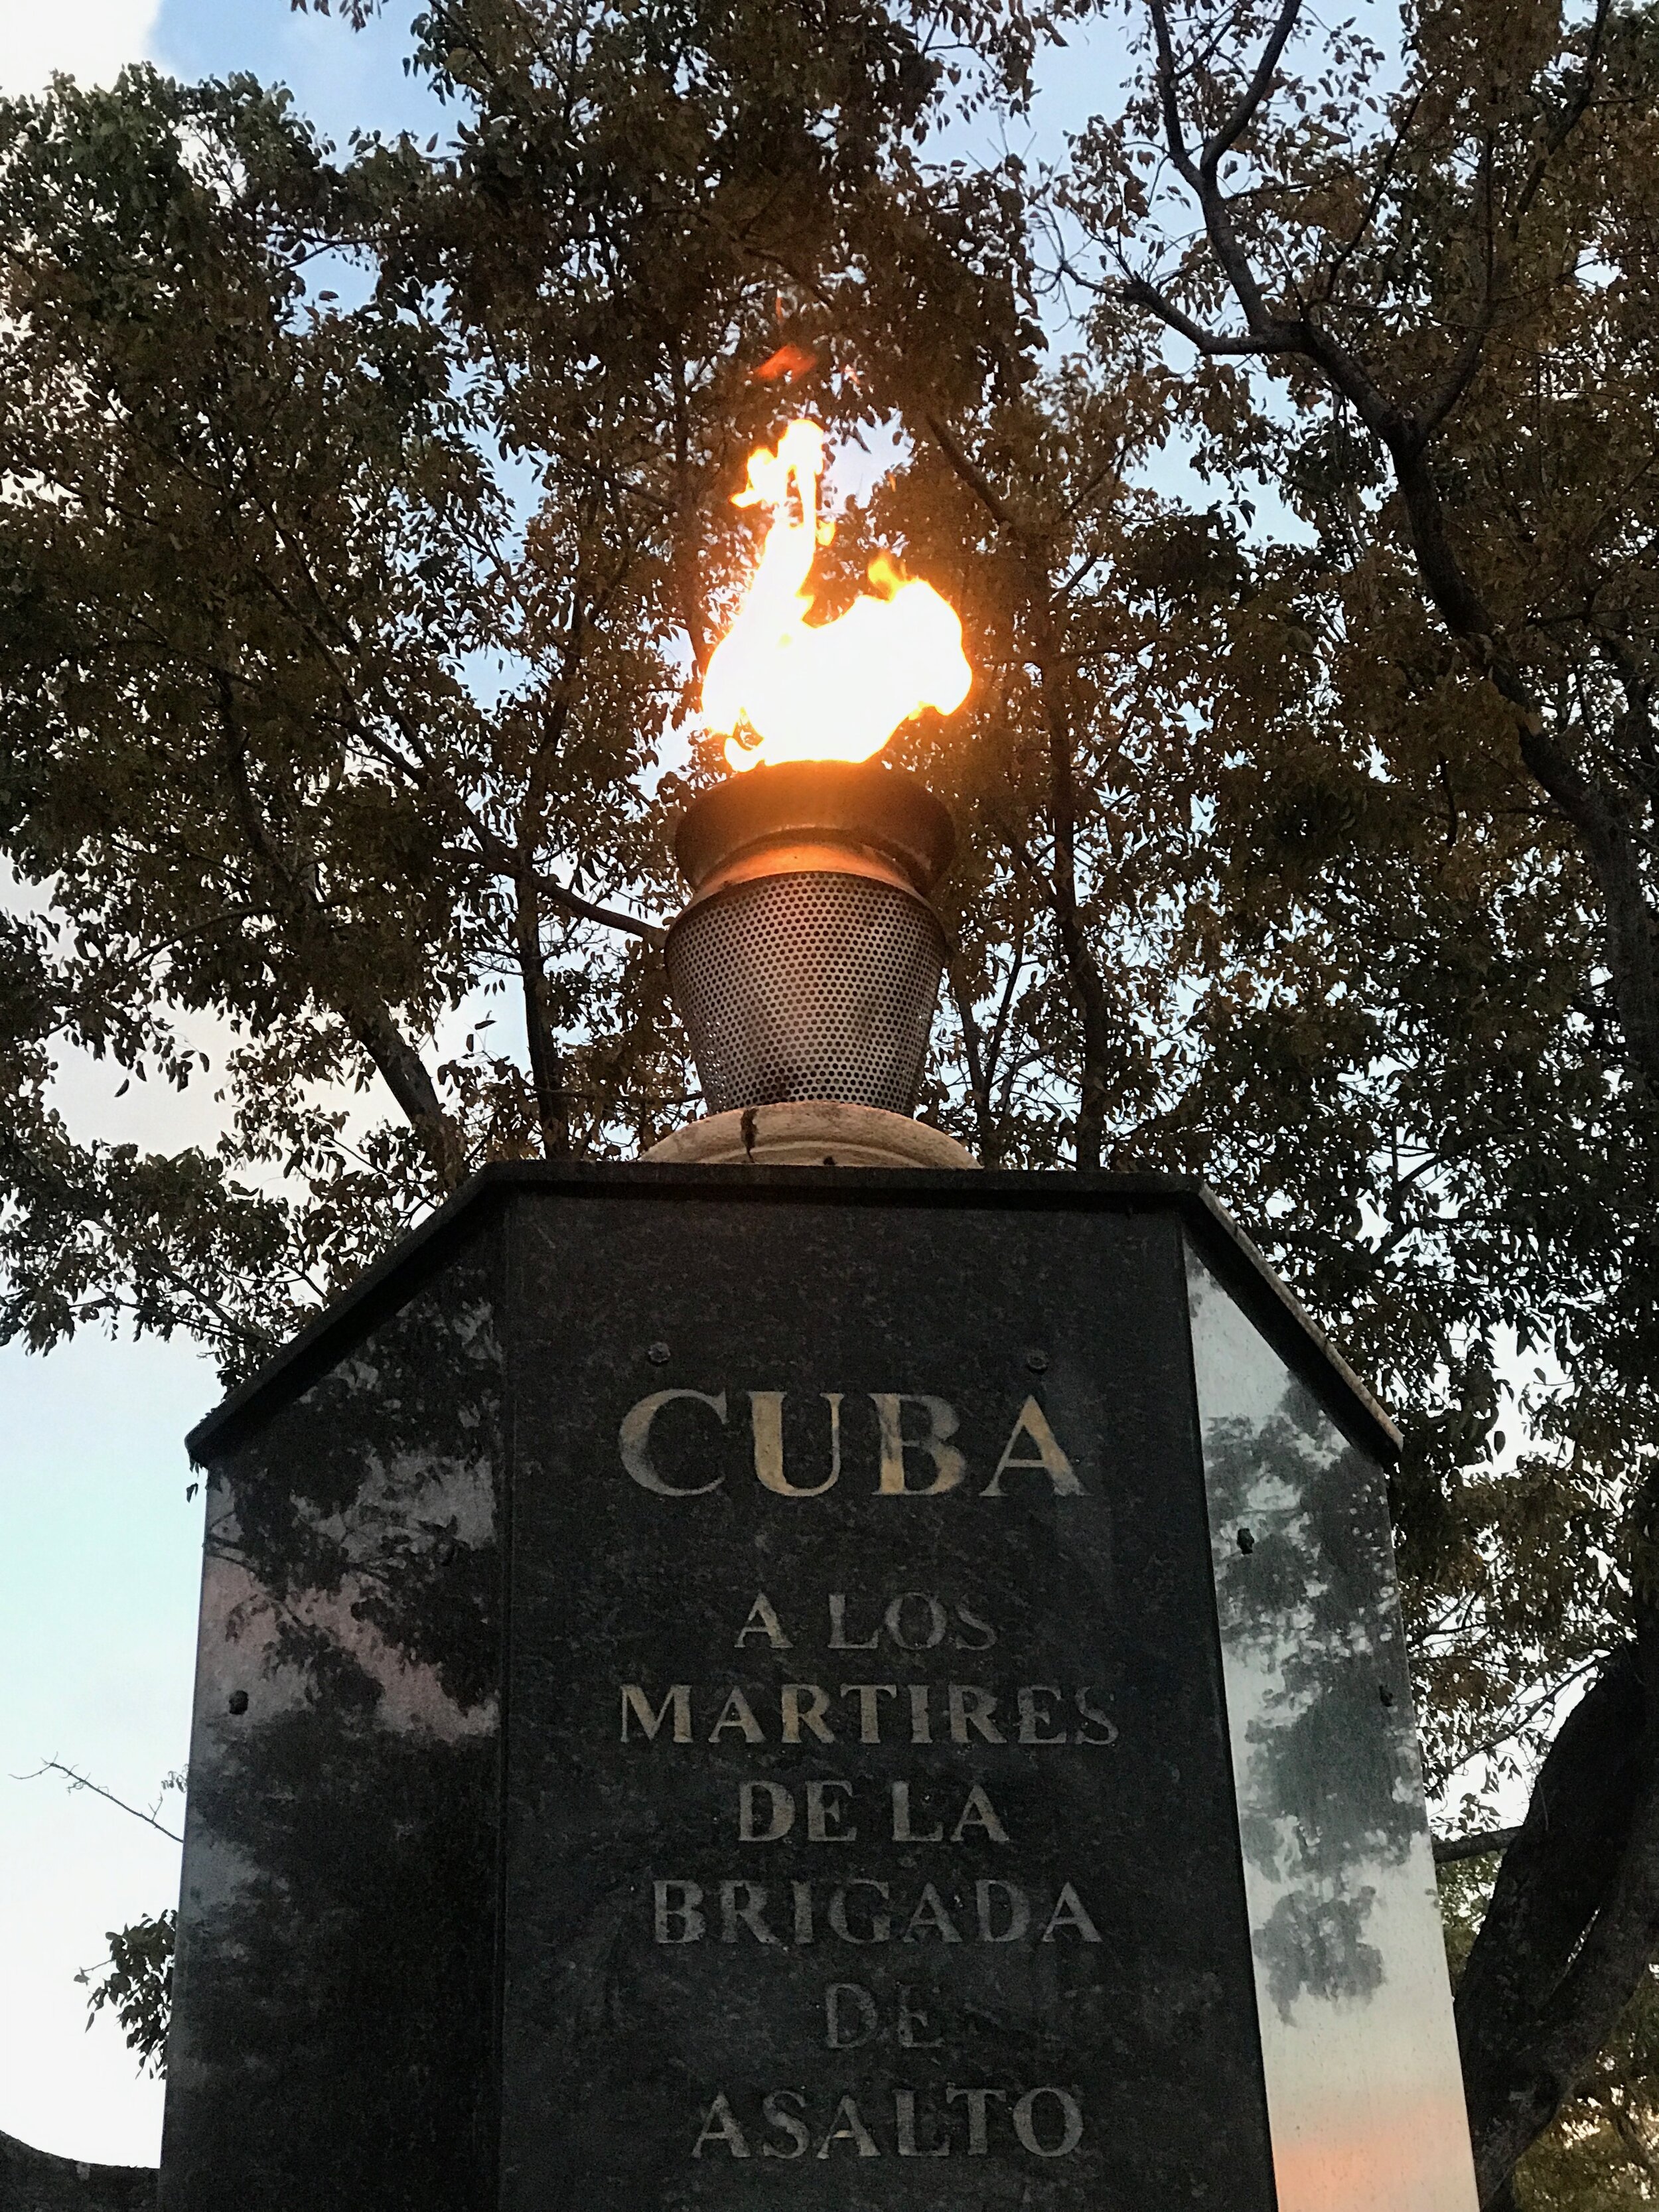  In Miami’s Little Havana, a flame still burns in memory of those killed at the Bay of Pigs. 